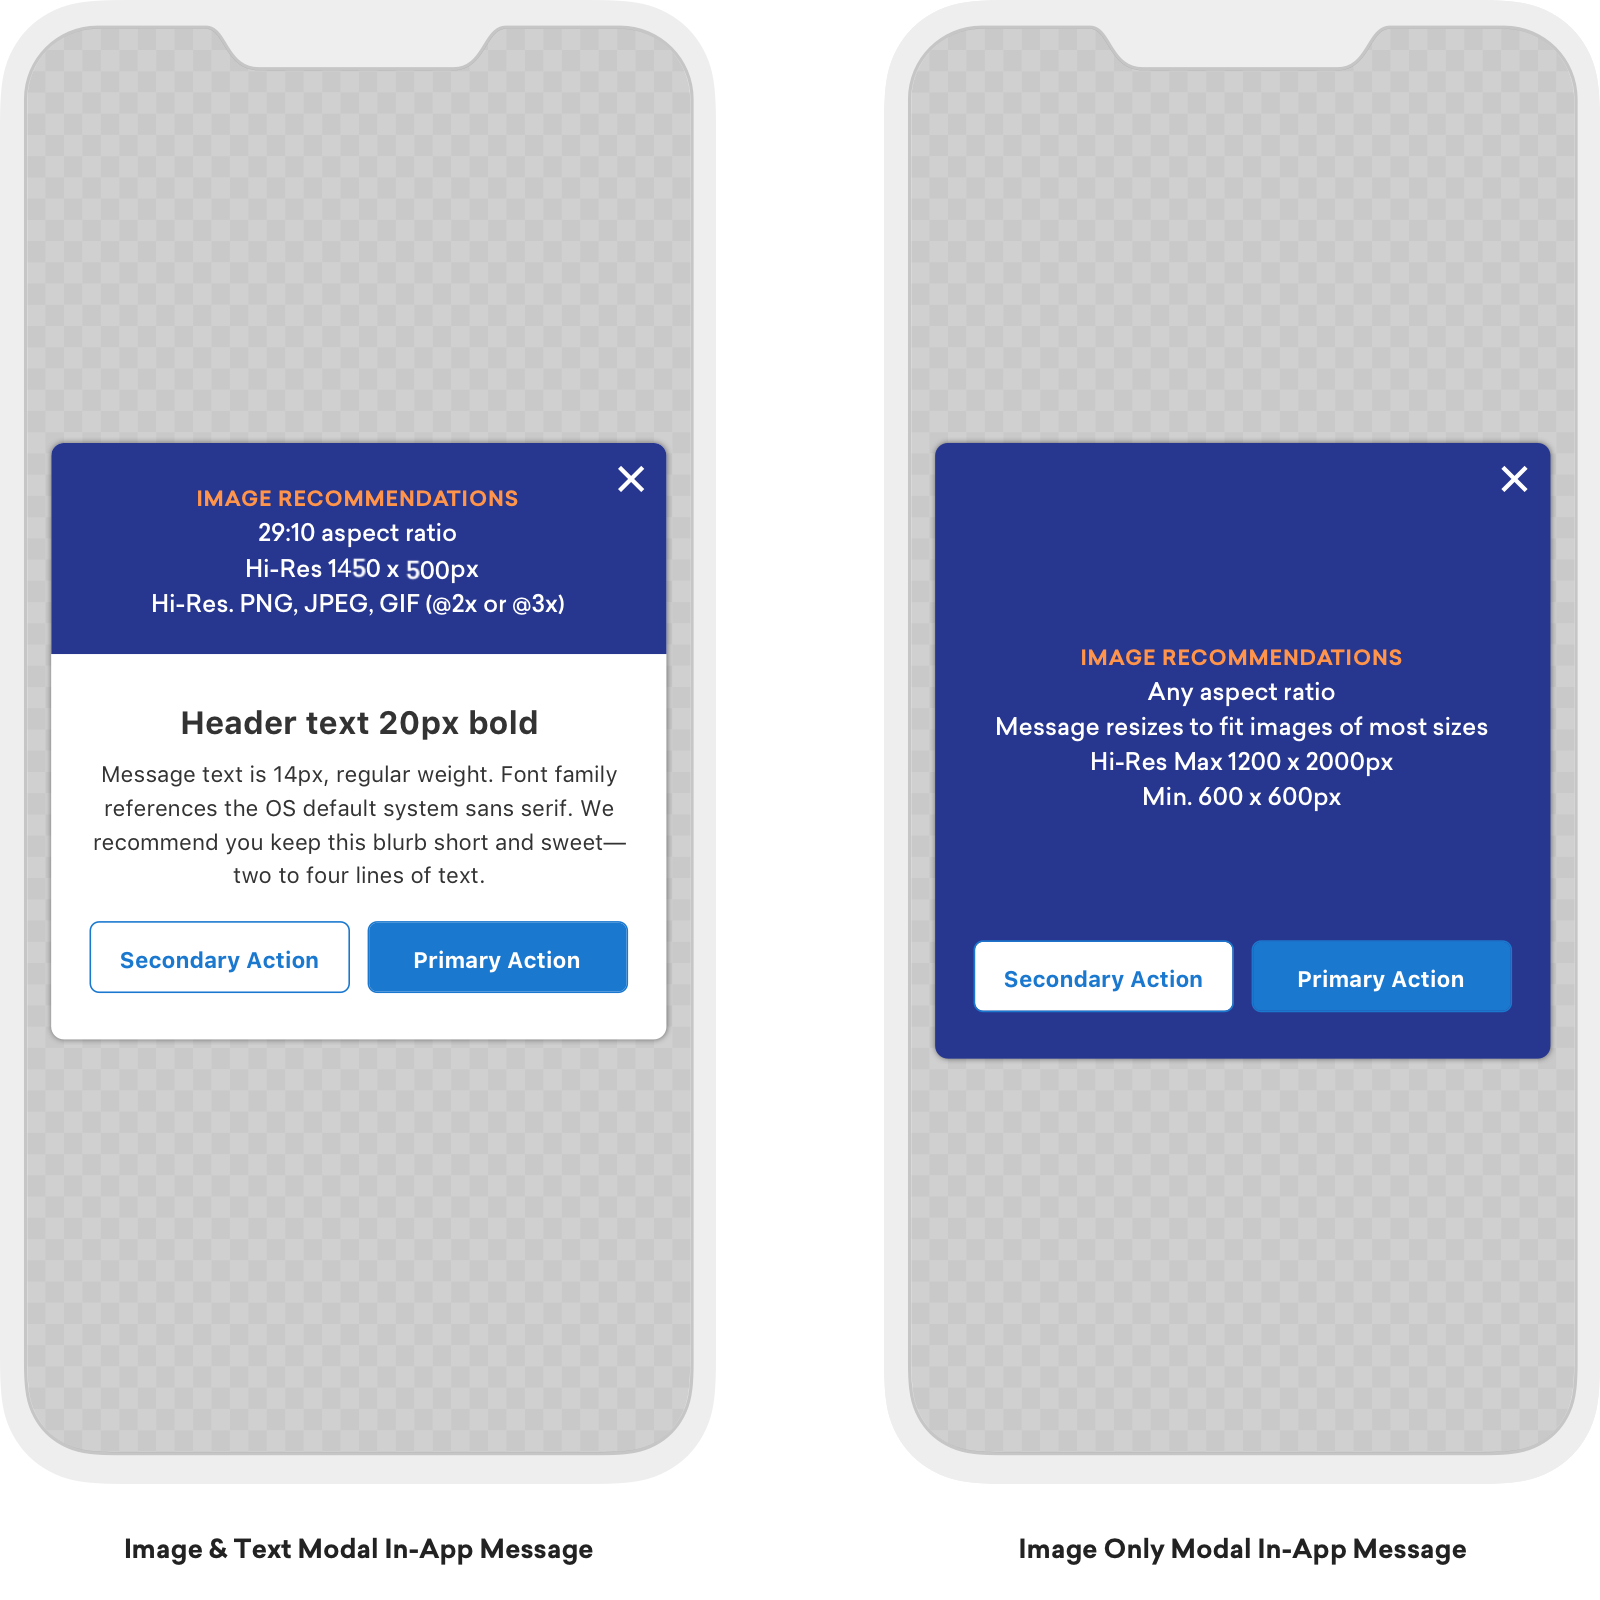 Two modal in-app messages side-by-side, detailing the image and text recommendations. See following sections for details.